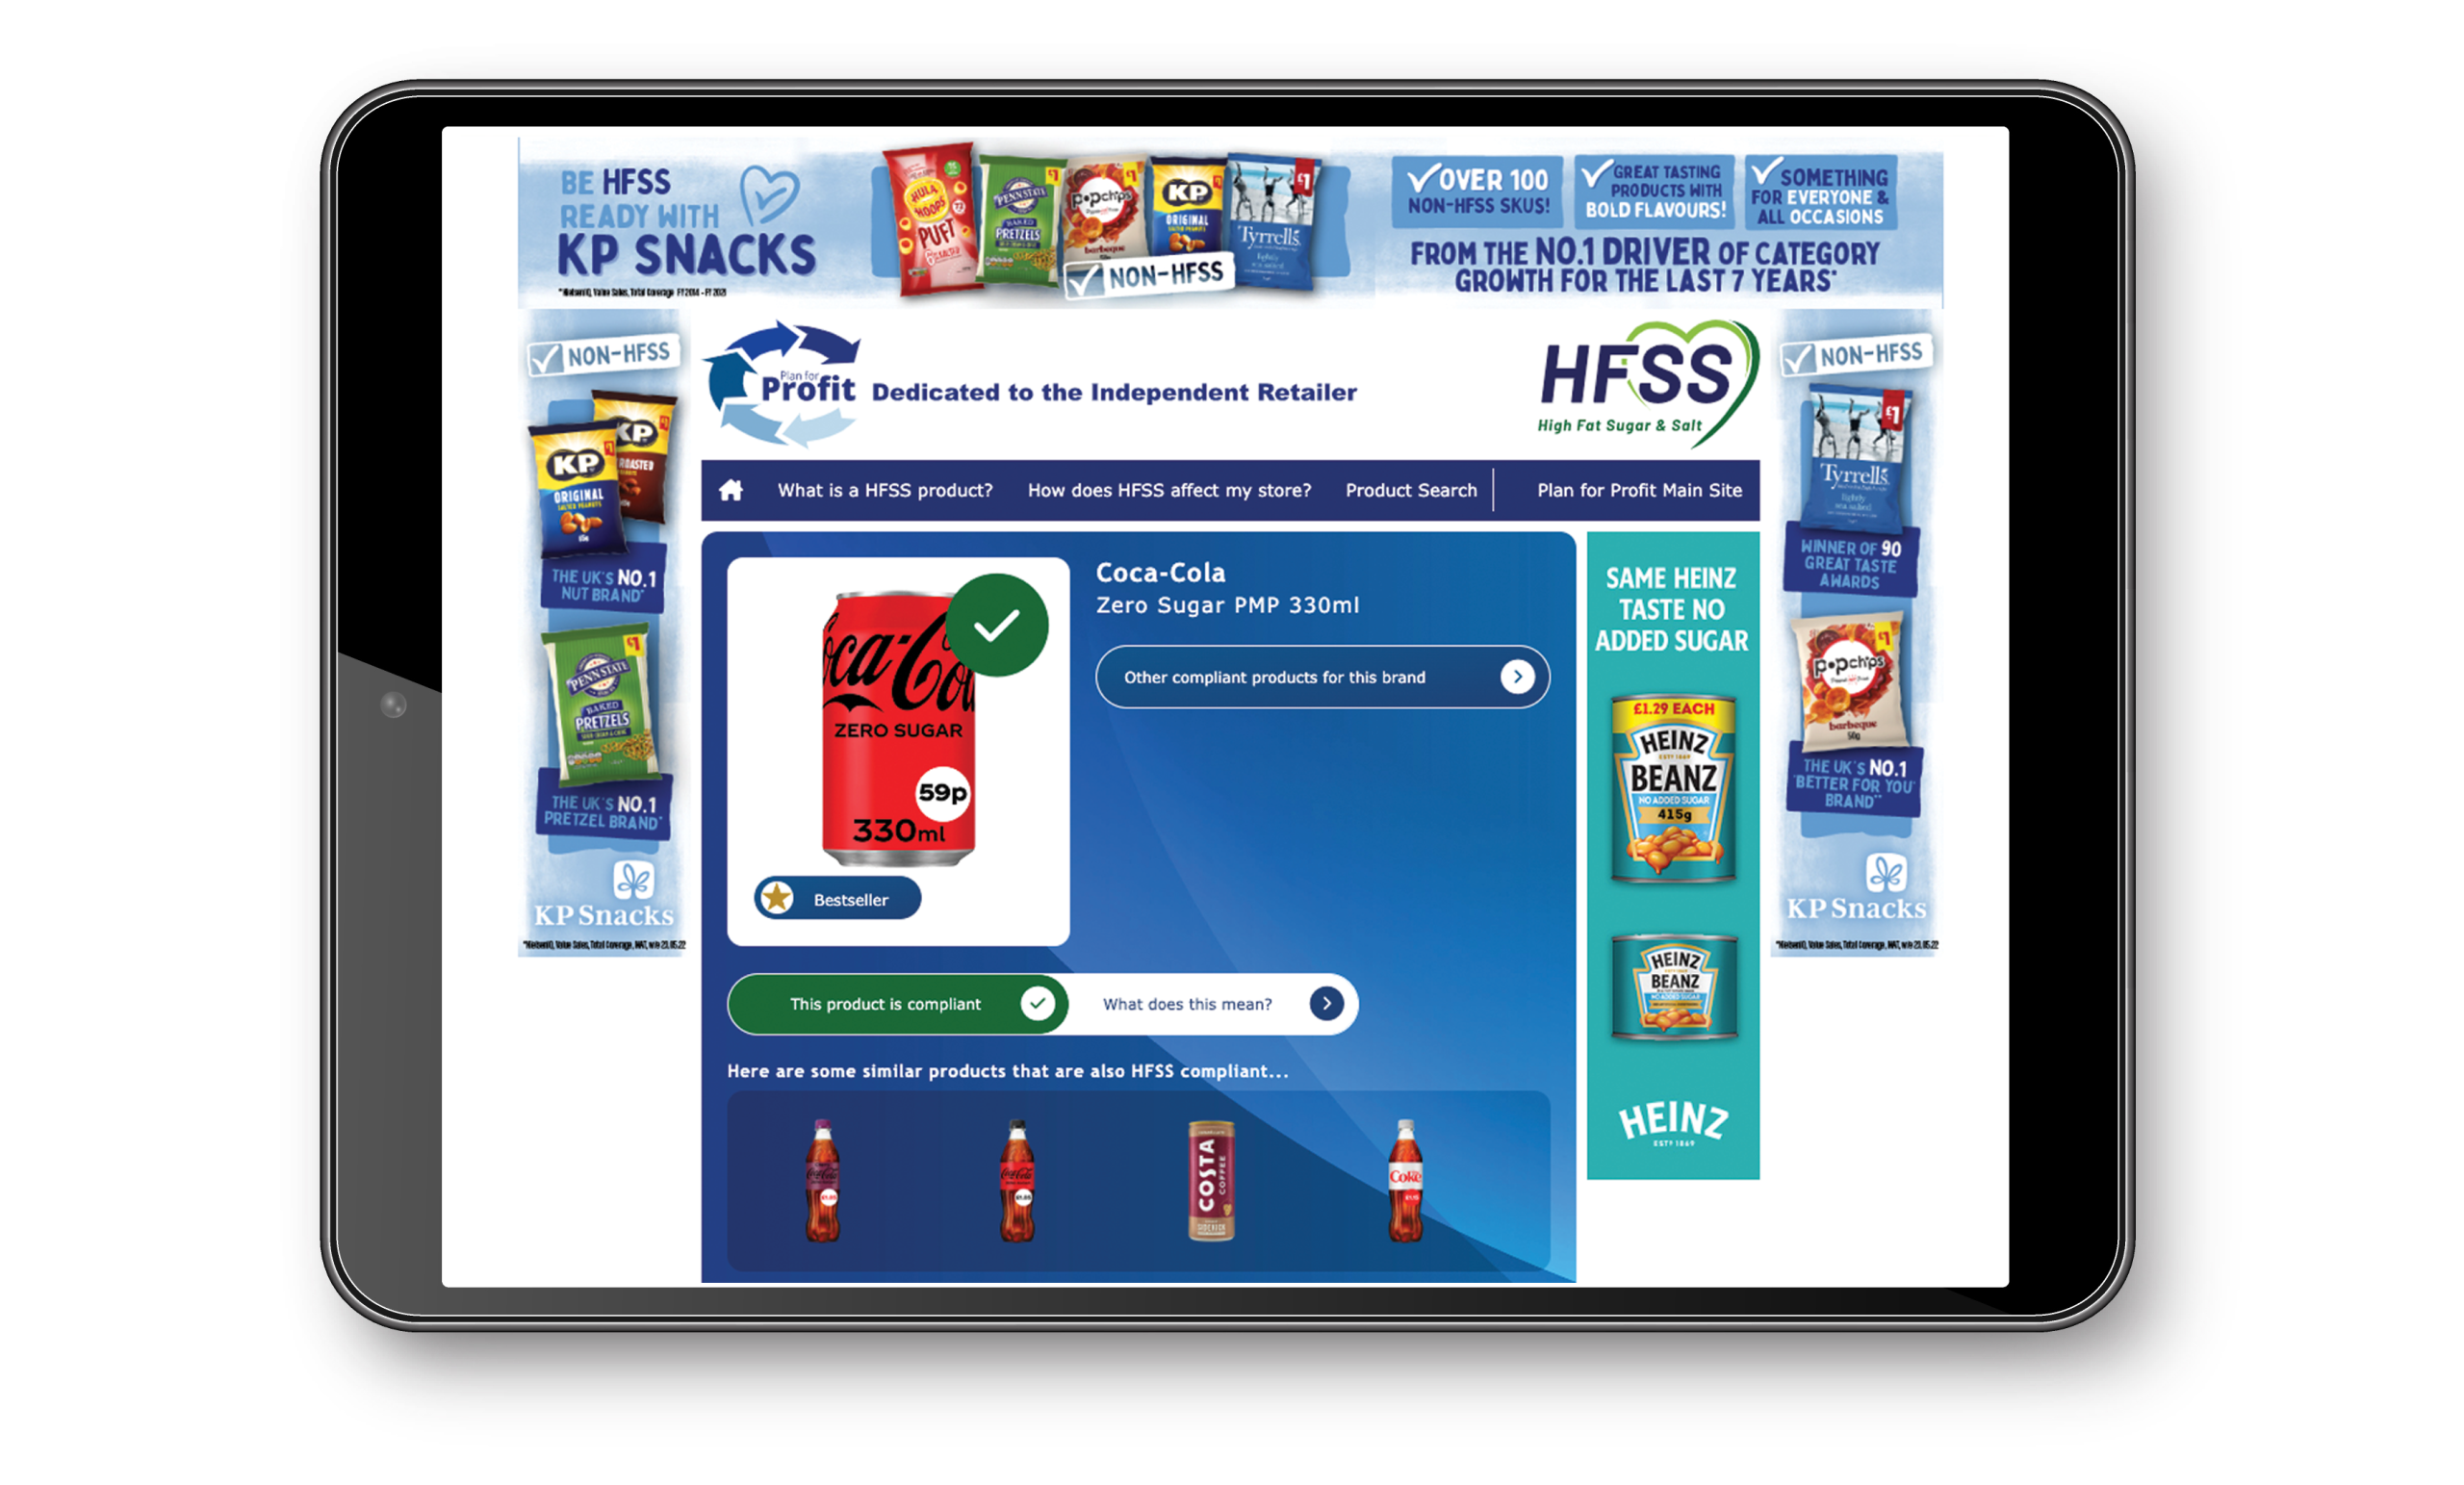 Plan for Profit launches HFSS product check tool